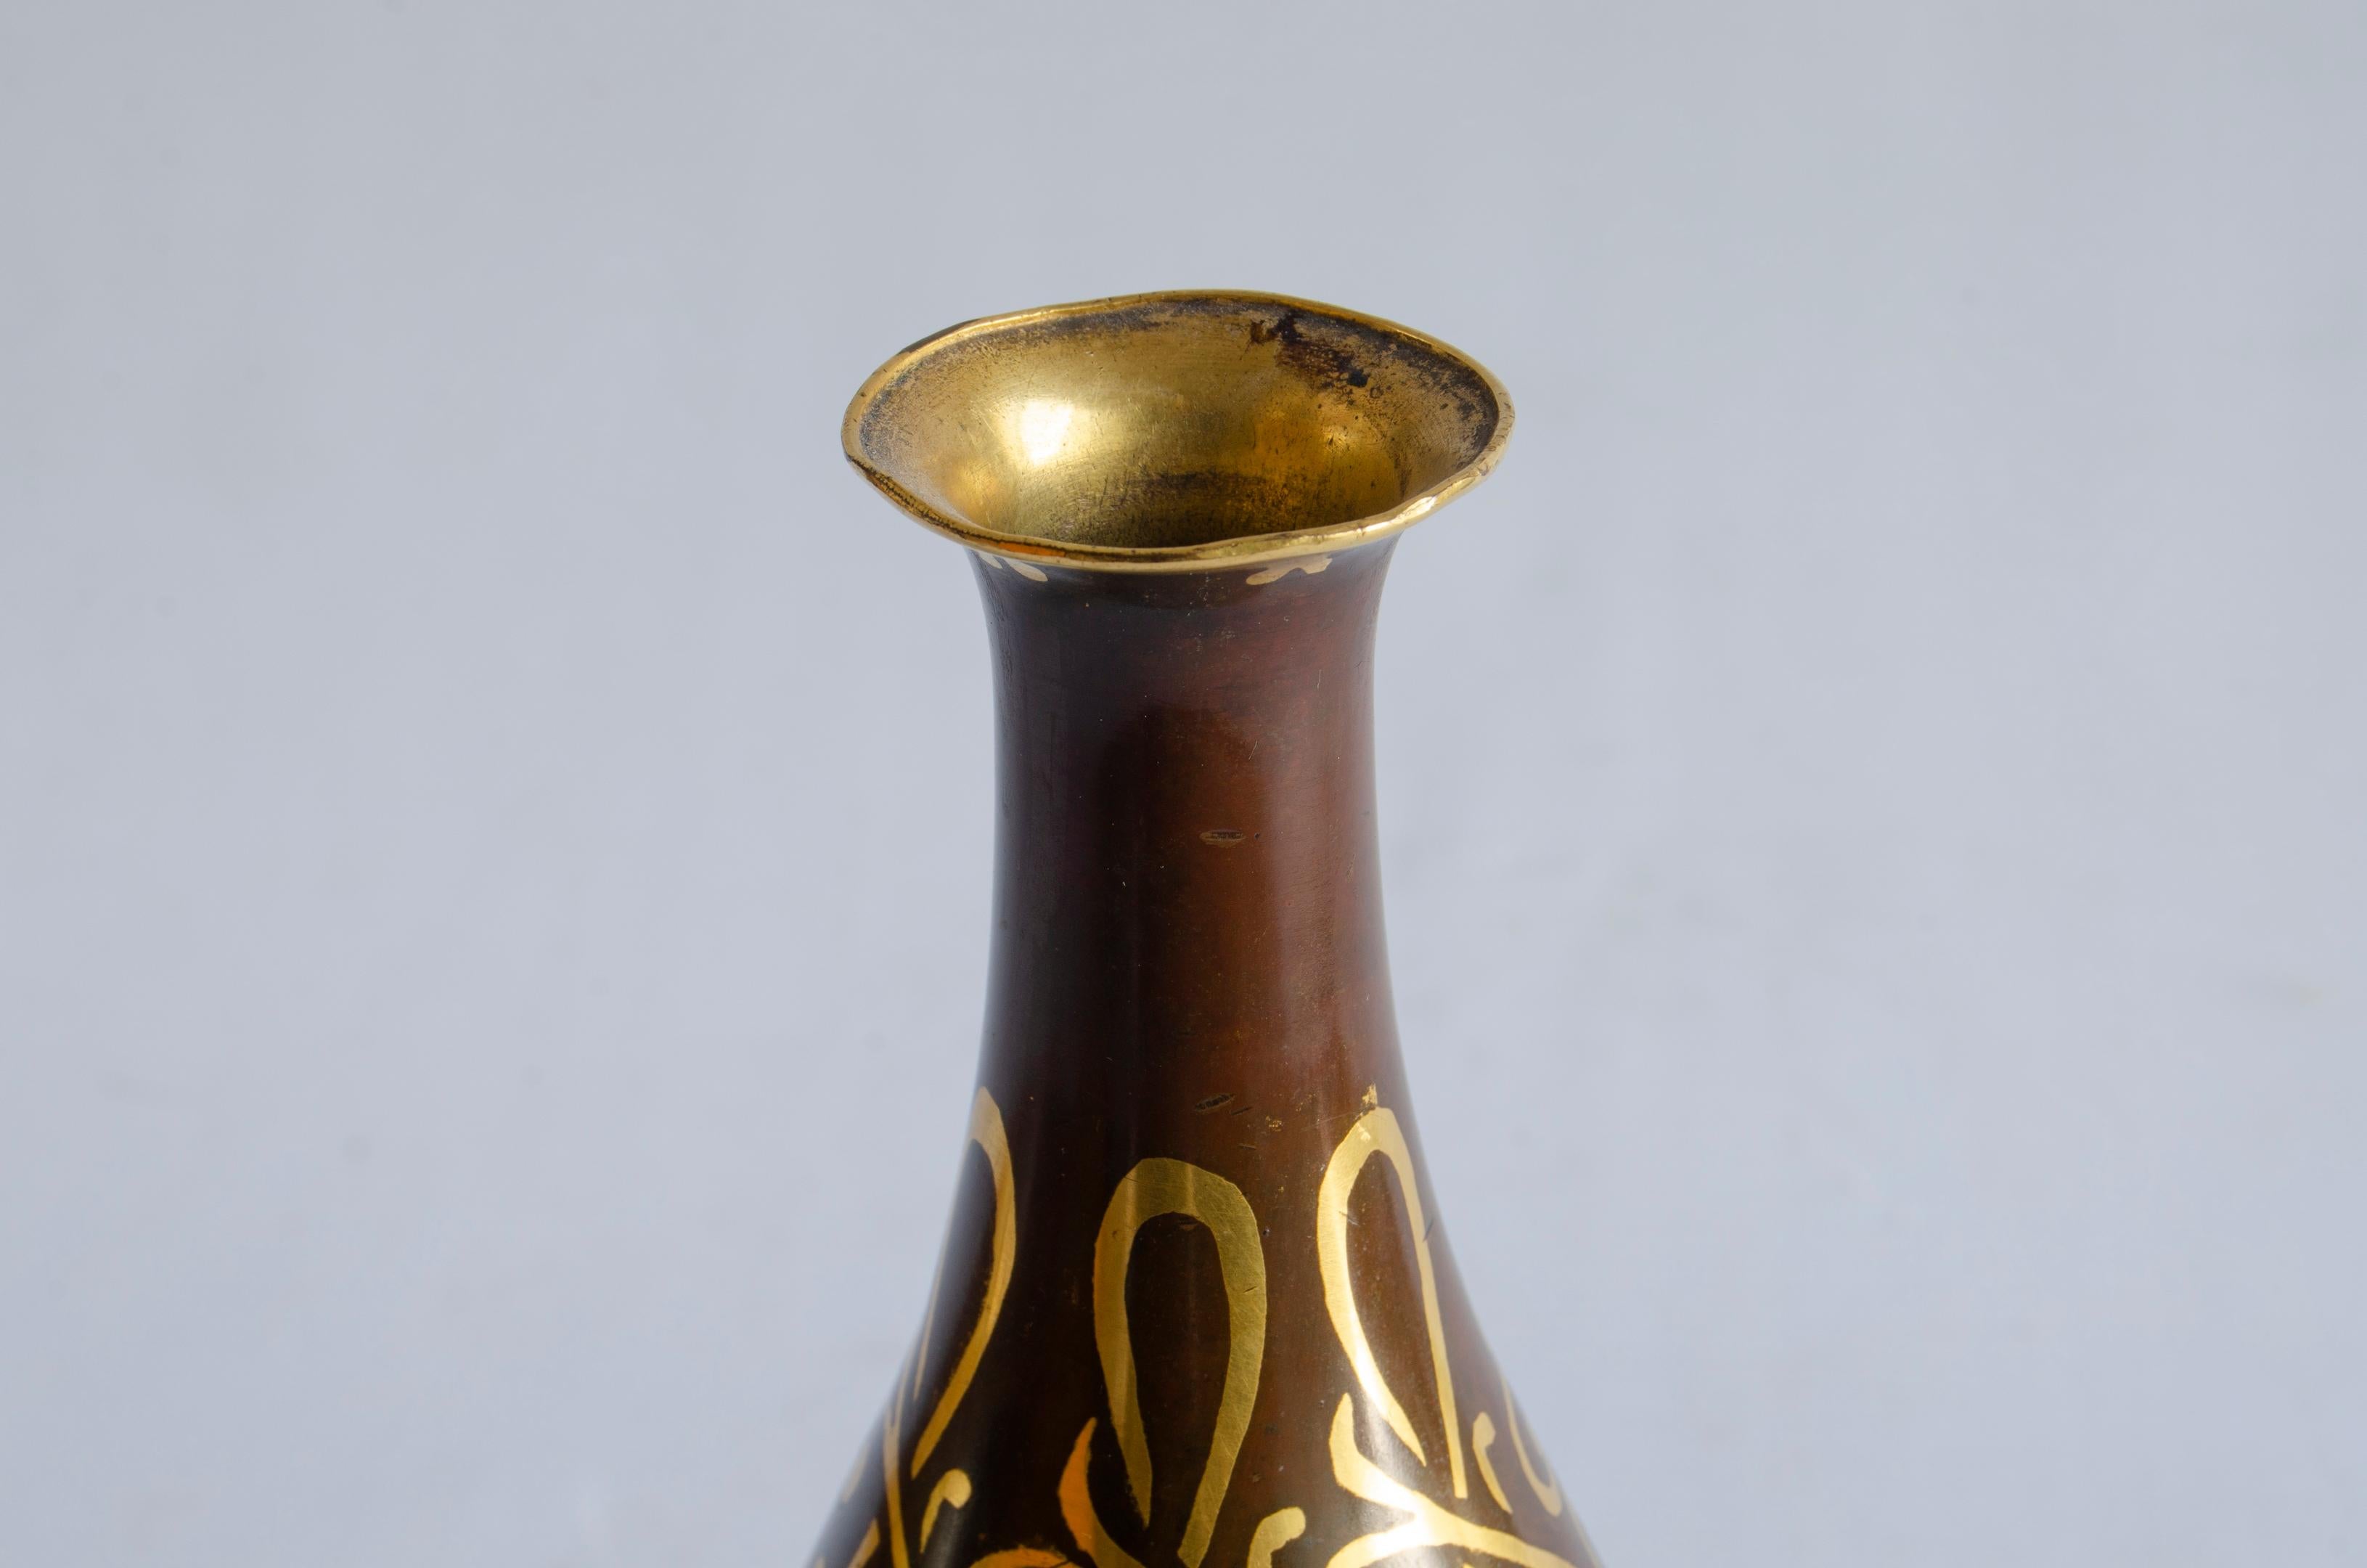 Christofle bottle (Dinanderie)
Bonce origin France
without restorations with original patina
(very small bumps on the bottom),
circa 1010.
Art nouveau, modernist art or modernism was an international artistic and decorative movement, developed